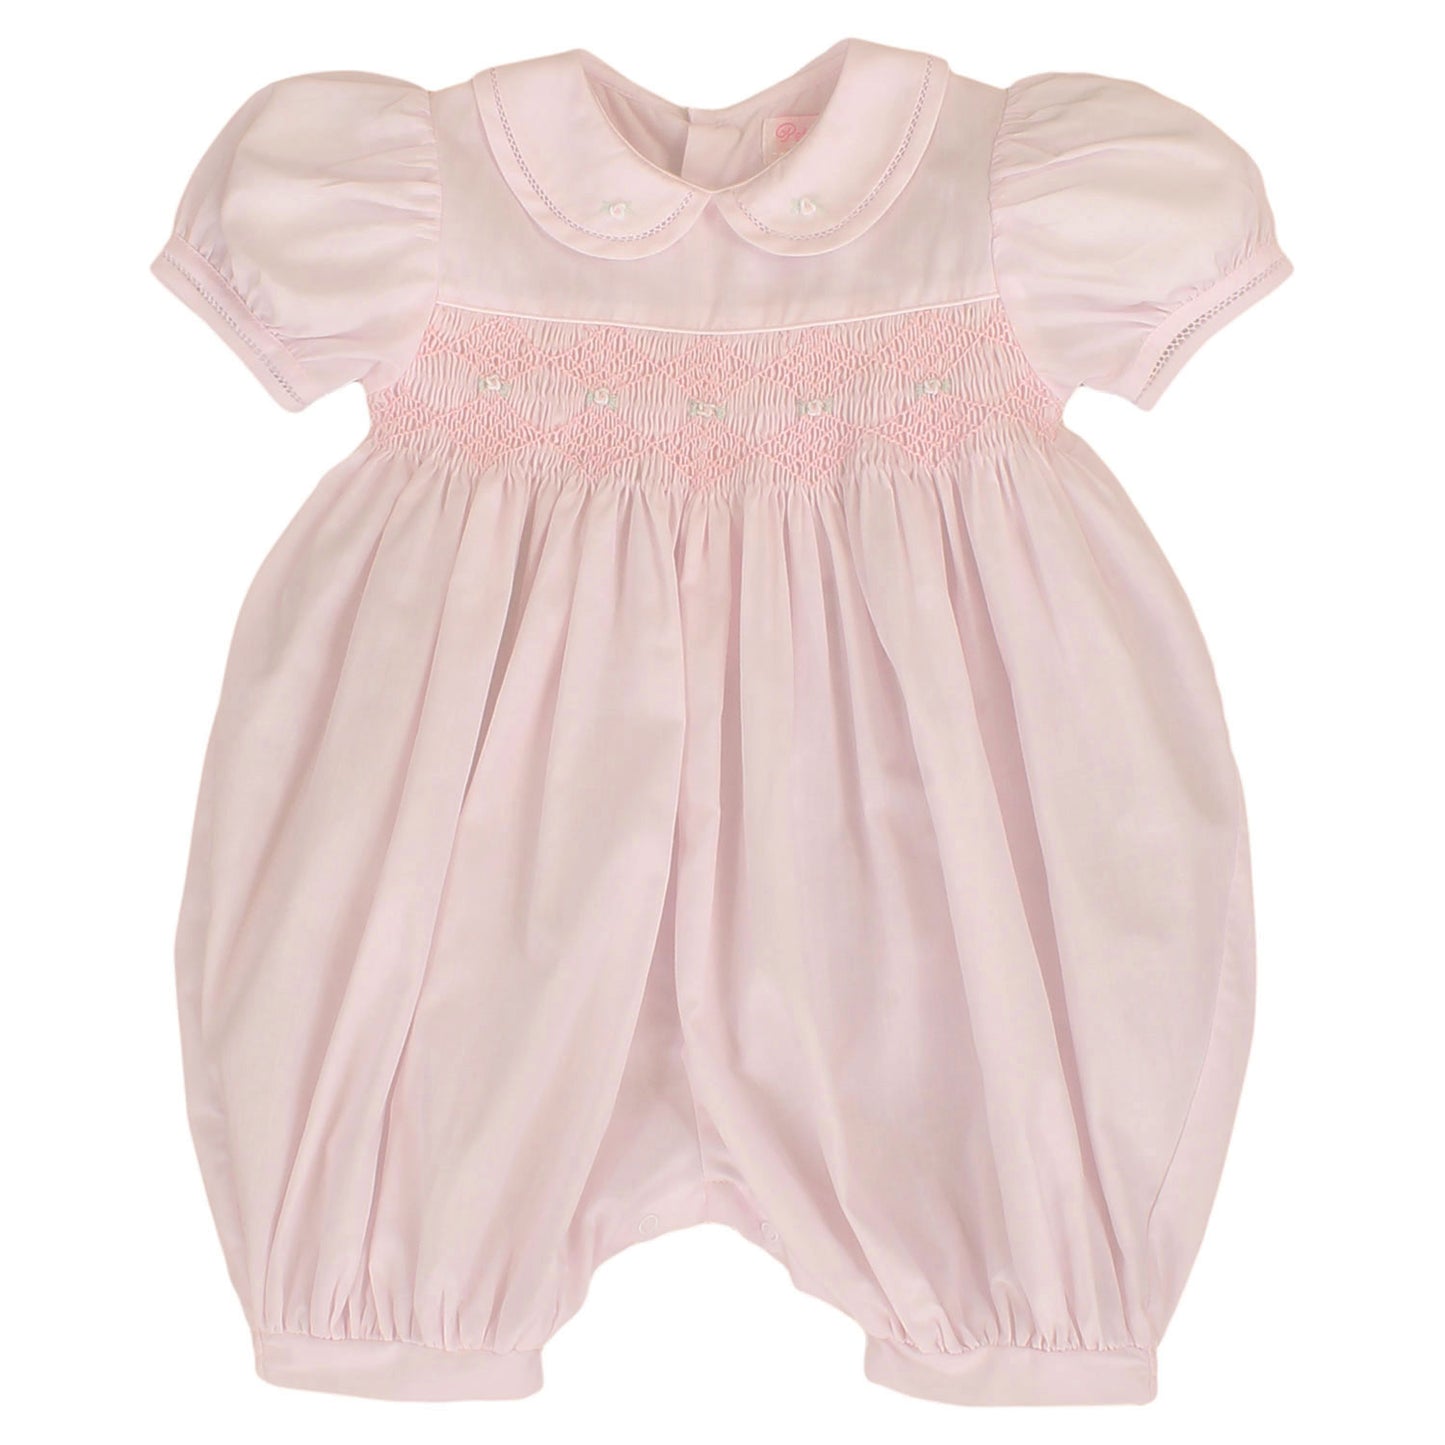 A baby girl's Pink French Bubble Diamond Smocked Romper with a square collar and train embroidery by Petit Ami.